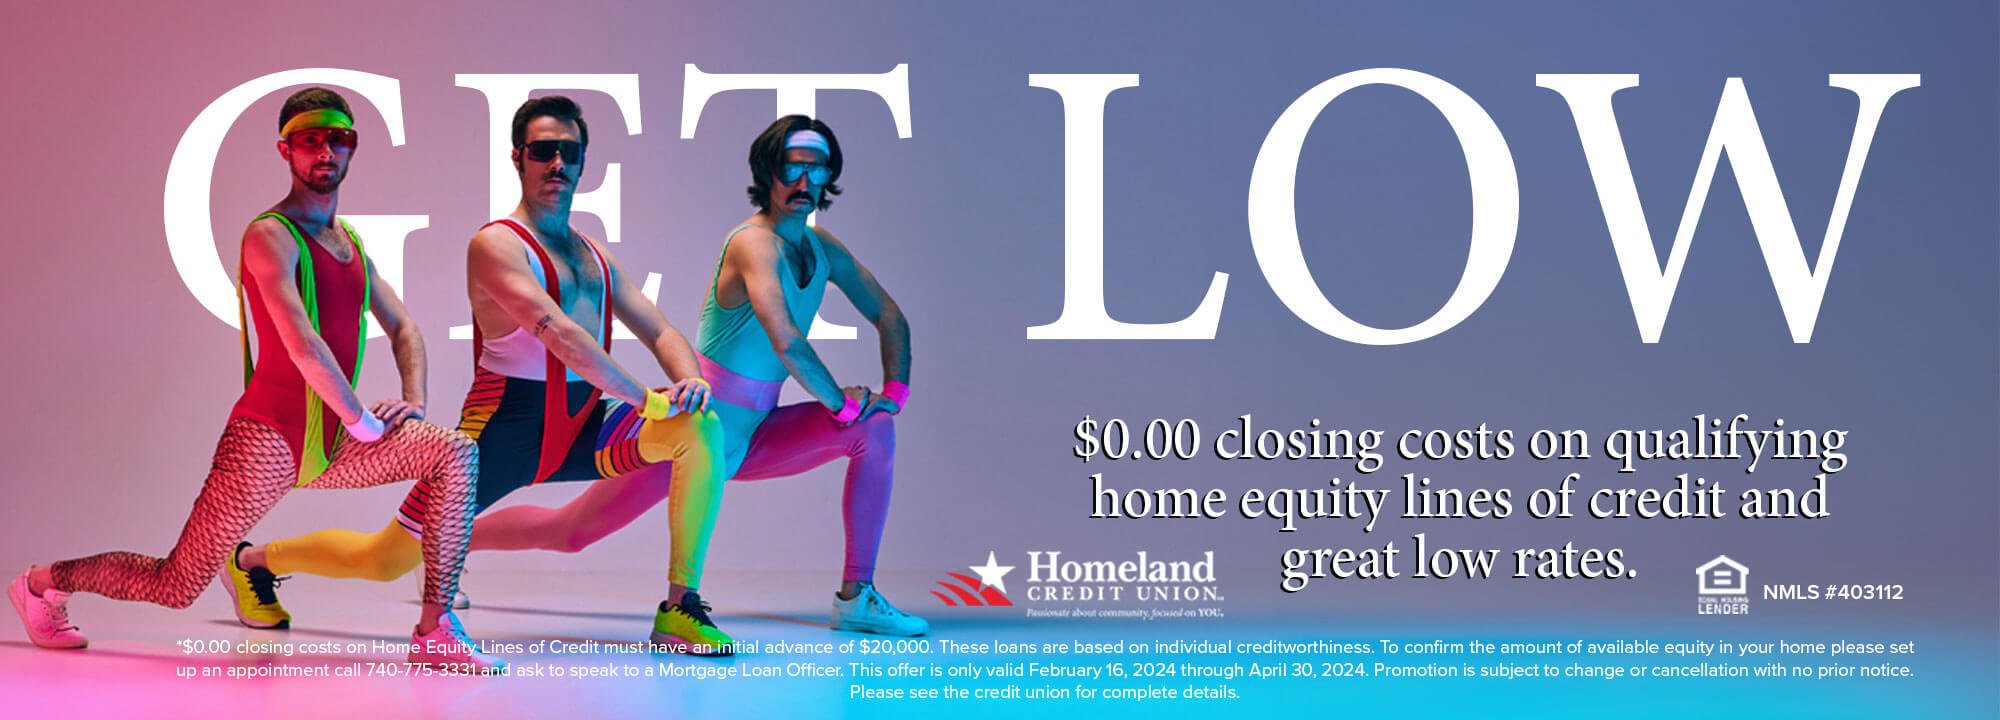 Get Low. $0.00 closing costs on qualifying home equity lines of credit and great low rates. February 16, 2024, through April 30, 2024, we are offering $0.00 closing costs on Home Equity Lines of Credit. These loans are based on individual creditworthiness. Home Equity Lines of Credit must have an initial advance of $20,000. To confirm the amount of available equity in your home please setup an appointment with a Mortgage Loan Officer by calling 740-775-3331. This offer is only valid from February 16, 2024, through April 30, 2024. Promotion is subject to change or cancellation with no prior notice. Please see the Credit Union for complete details. NMLS #403112